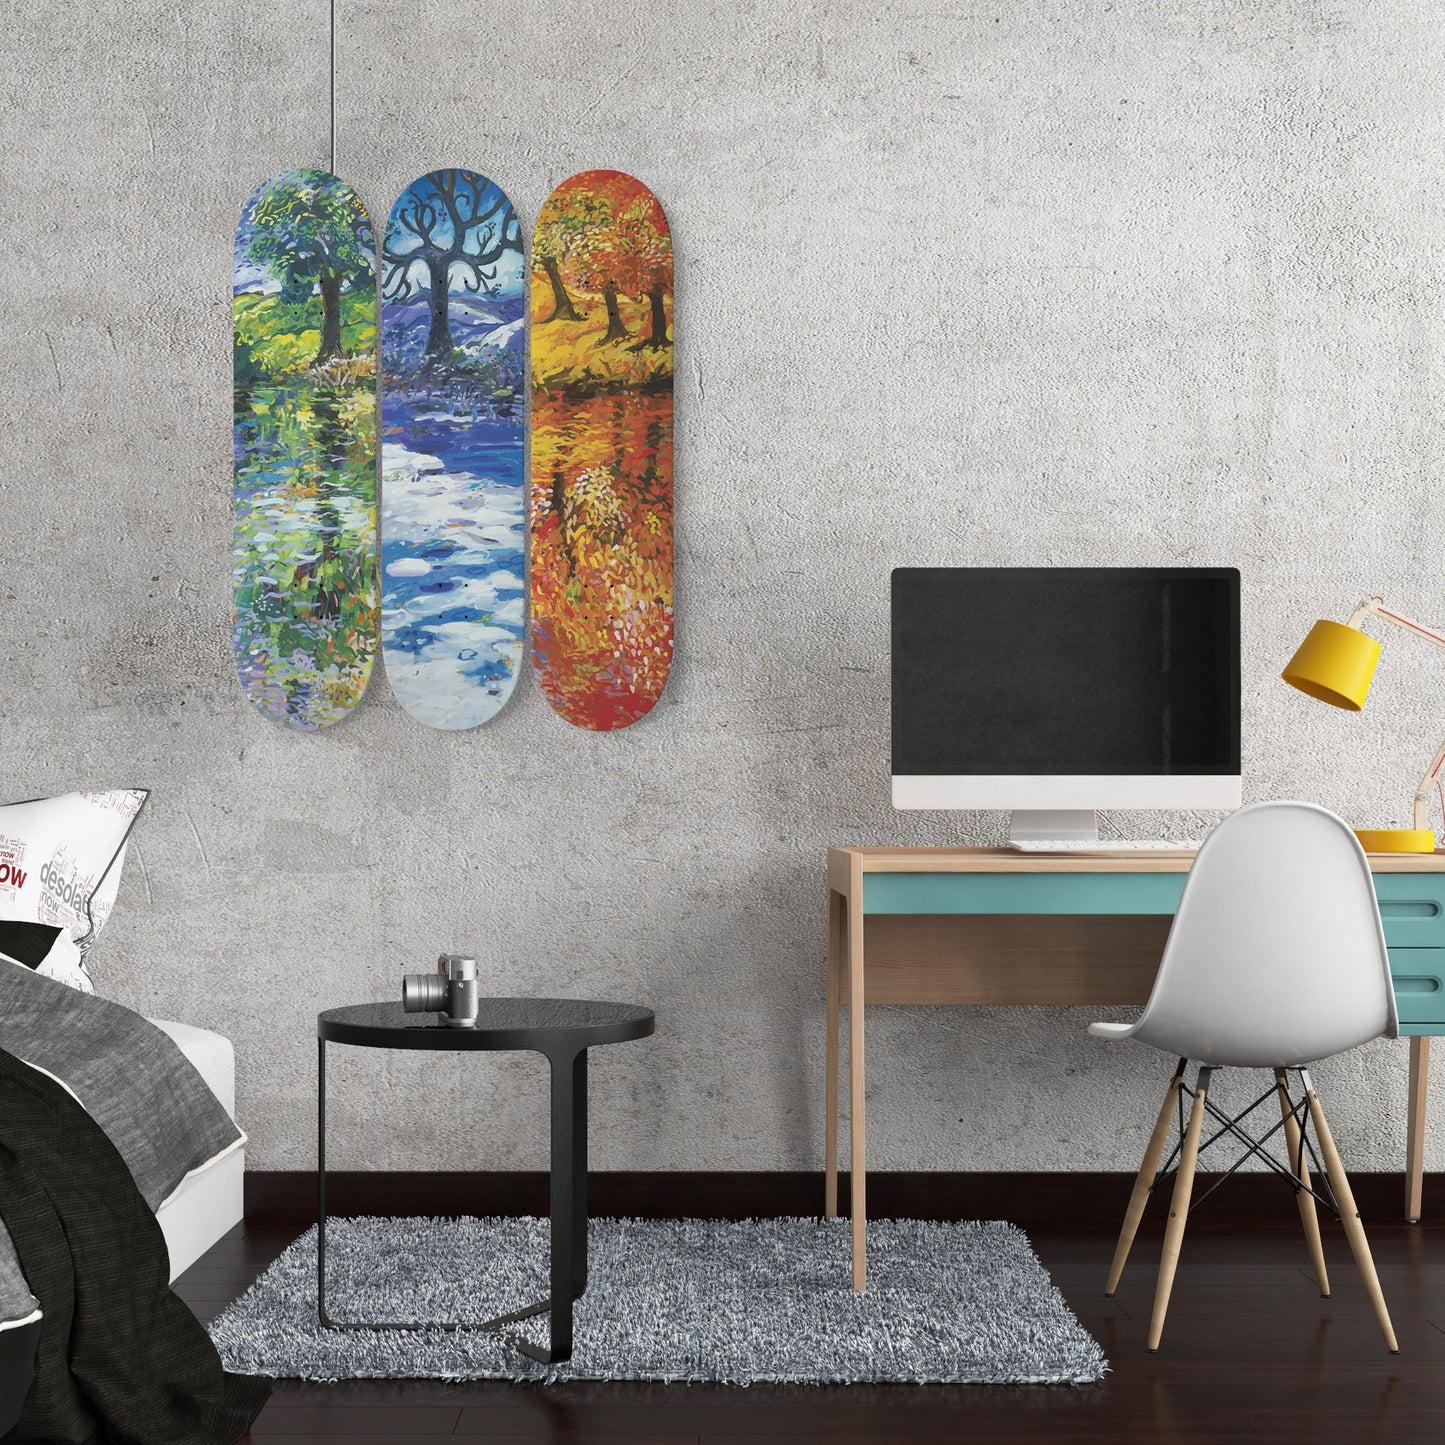 Random Colorful Artwork 11 | Skateboard Deck Wall Art, Wall Hanged Room Decoration, Maple Wood, Accent Gift for Home, Aesthetic Wall Art